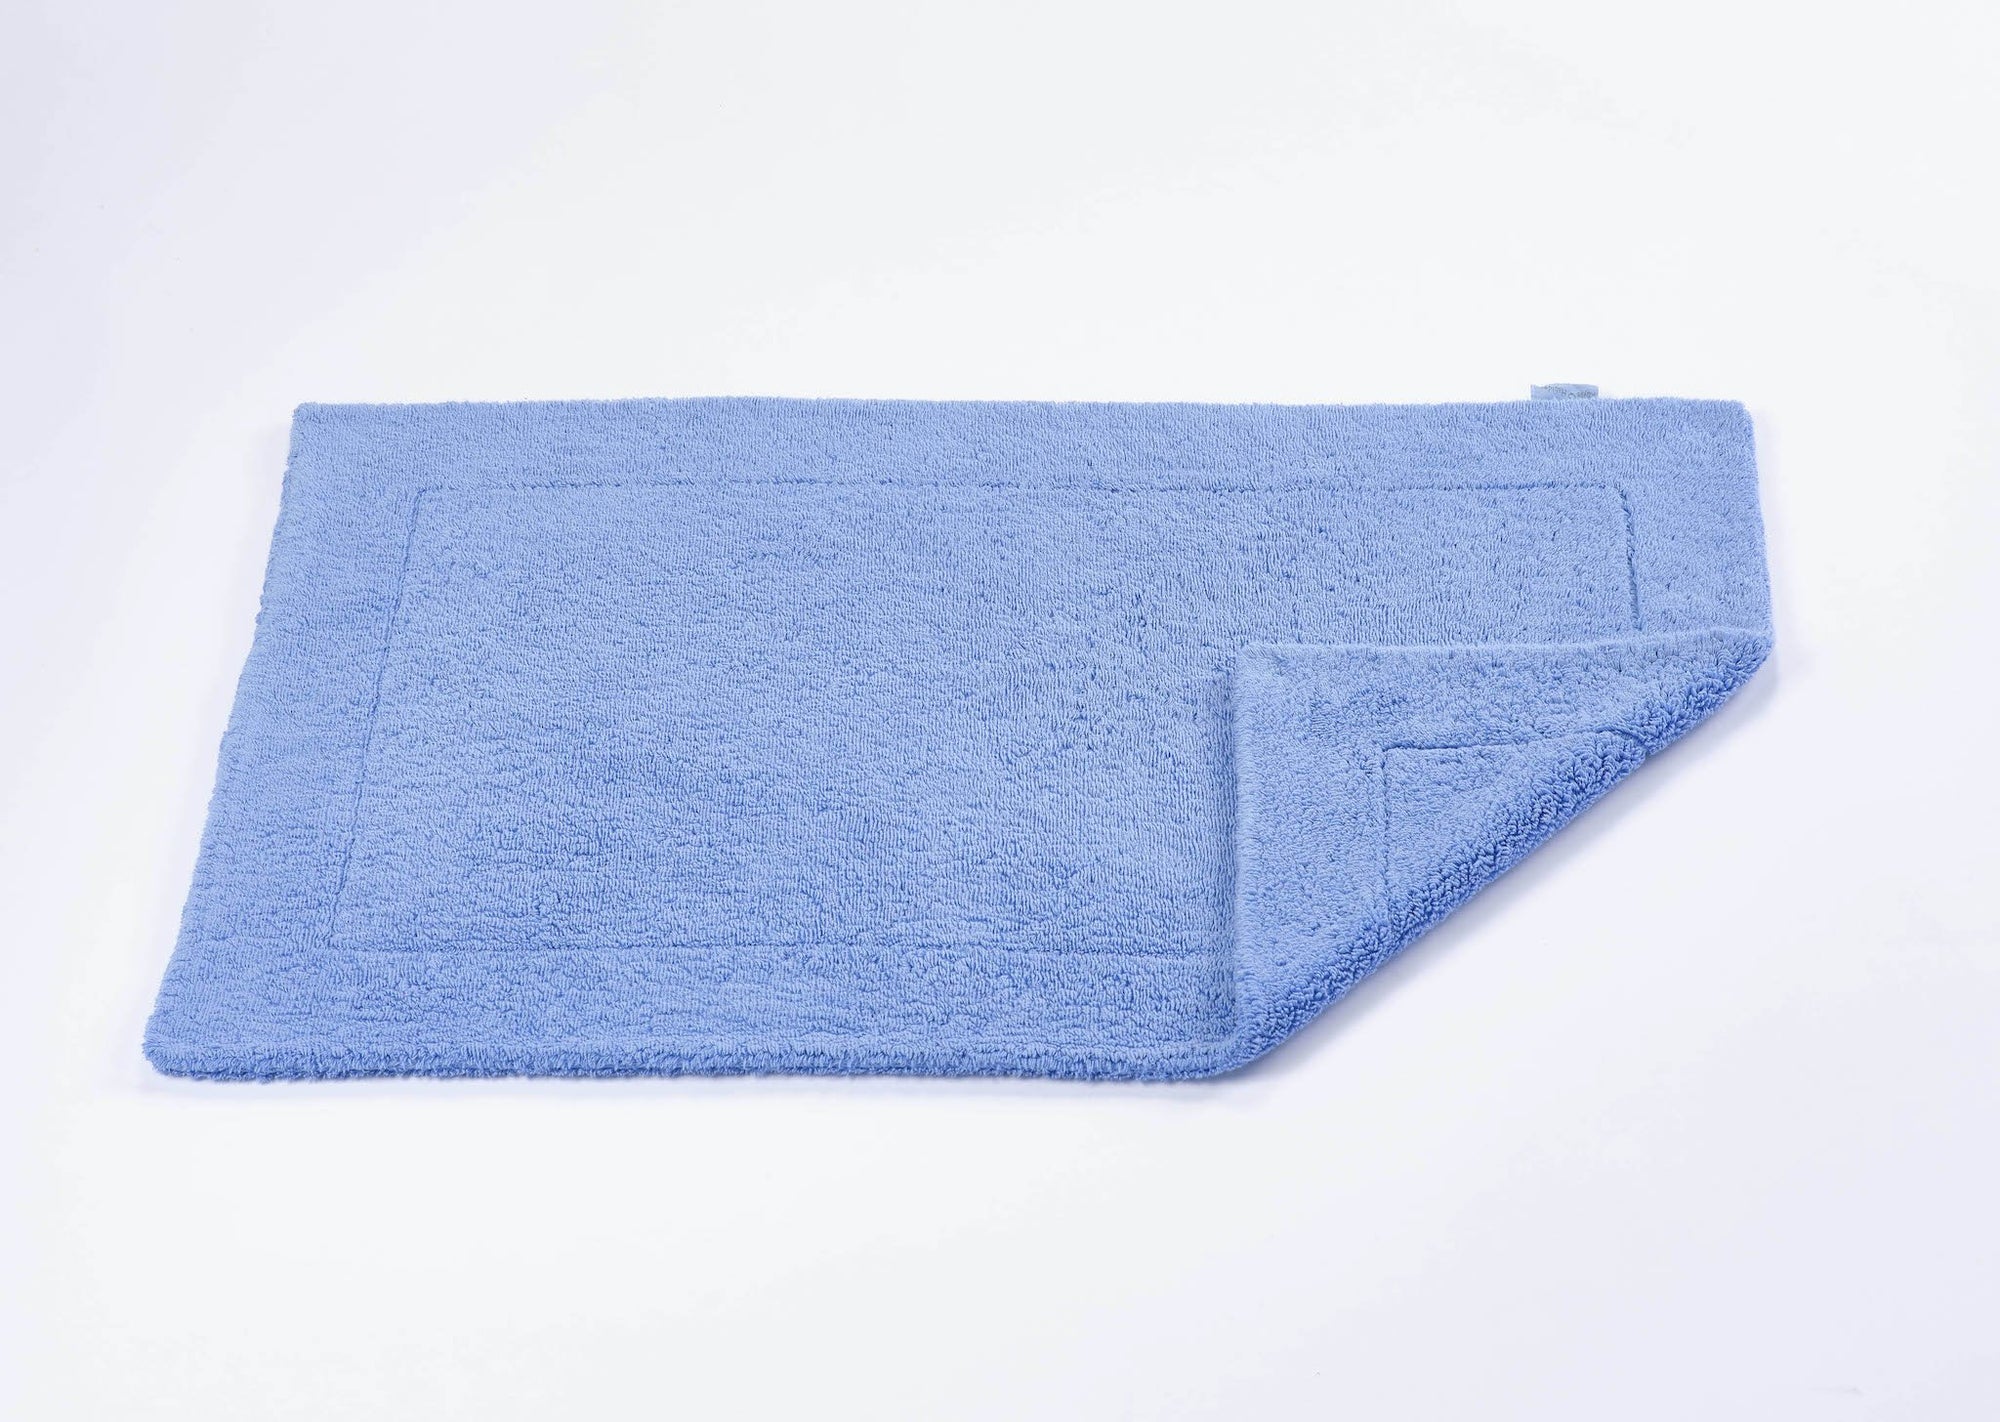 Fig Linens - Double Bath Mat 20x31 by Abyss and Habidecor -  Regatta